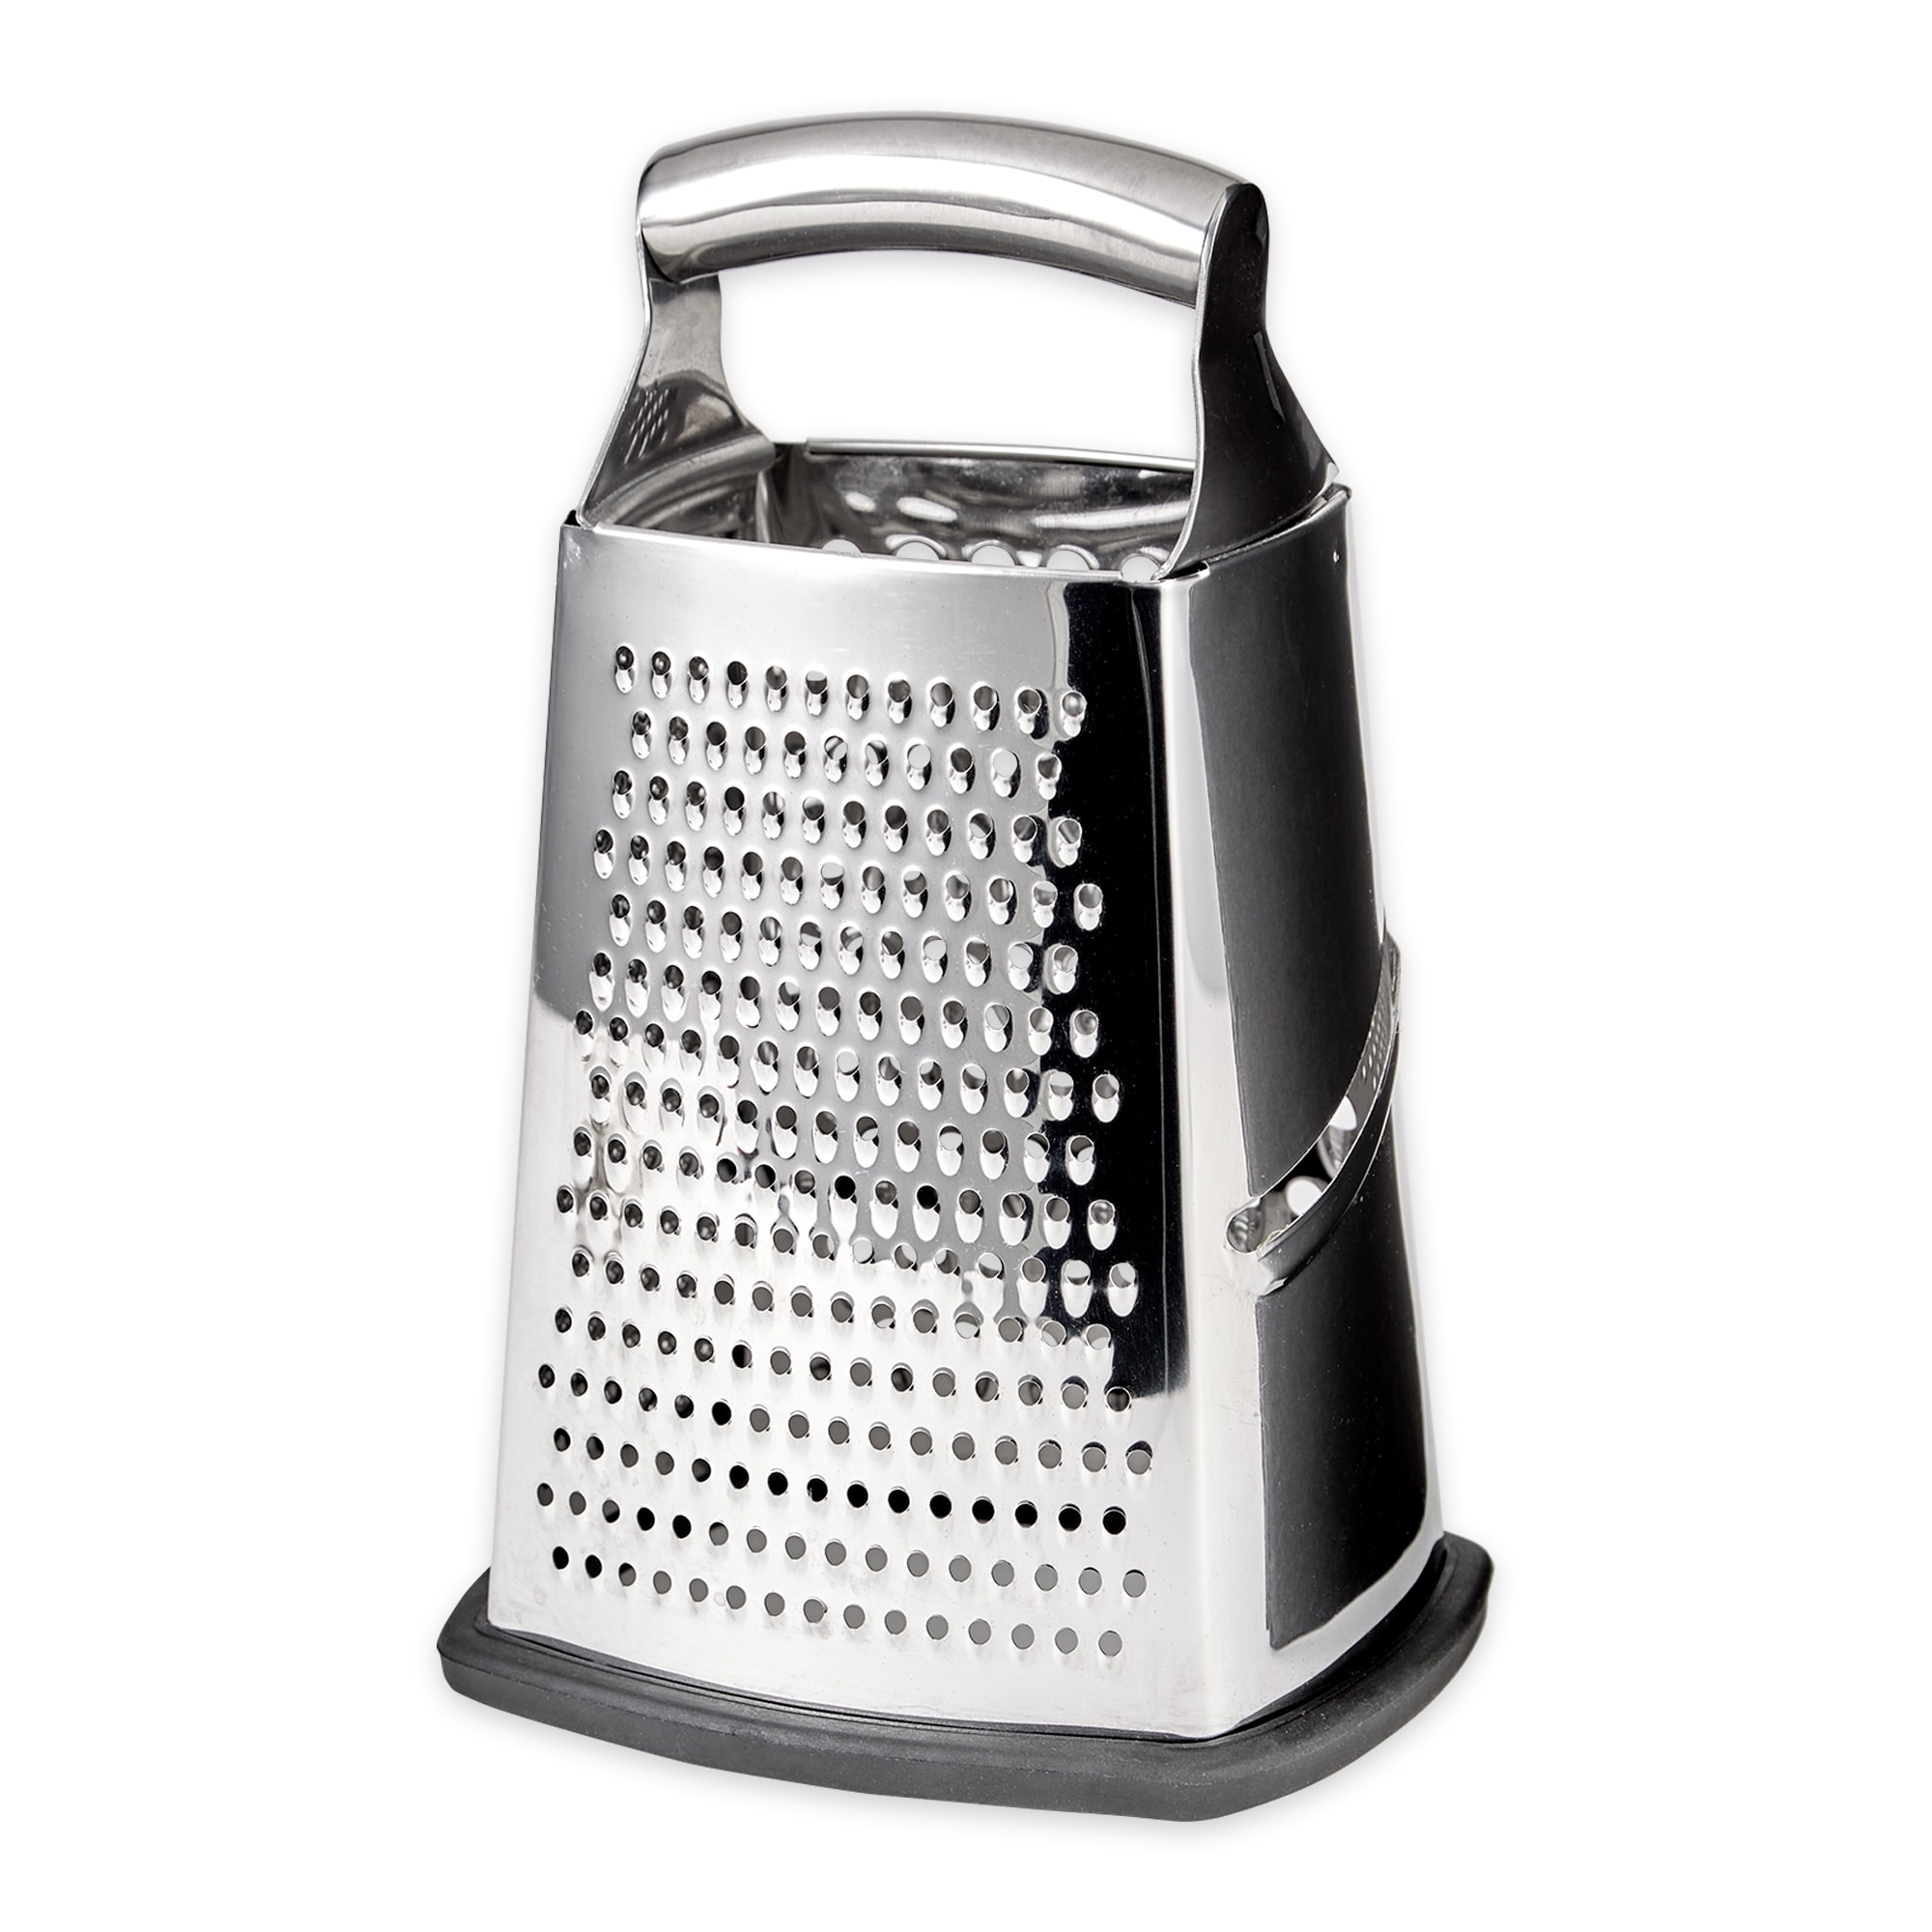 https://ak1.ostkcdn.com/images/products/is/images/direct/c2bcba484204896ff32828b3ca44cbf750e2fa03/Deluxe-Handheld-Box-Grater.jpg